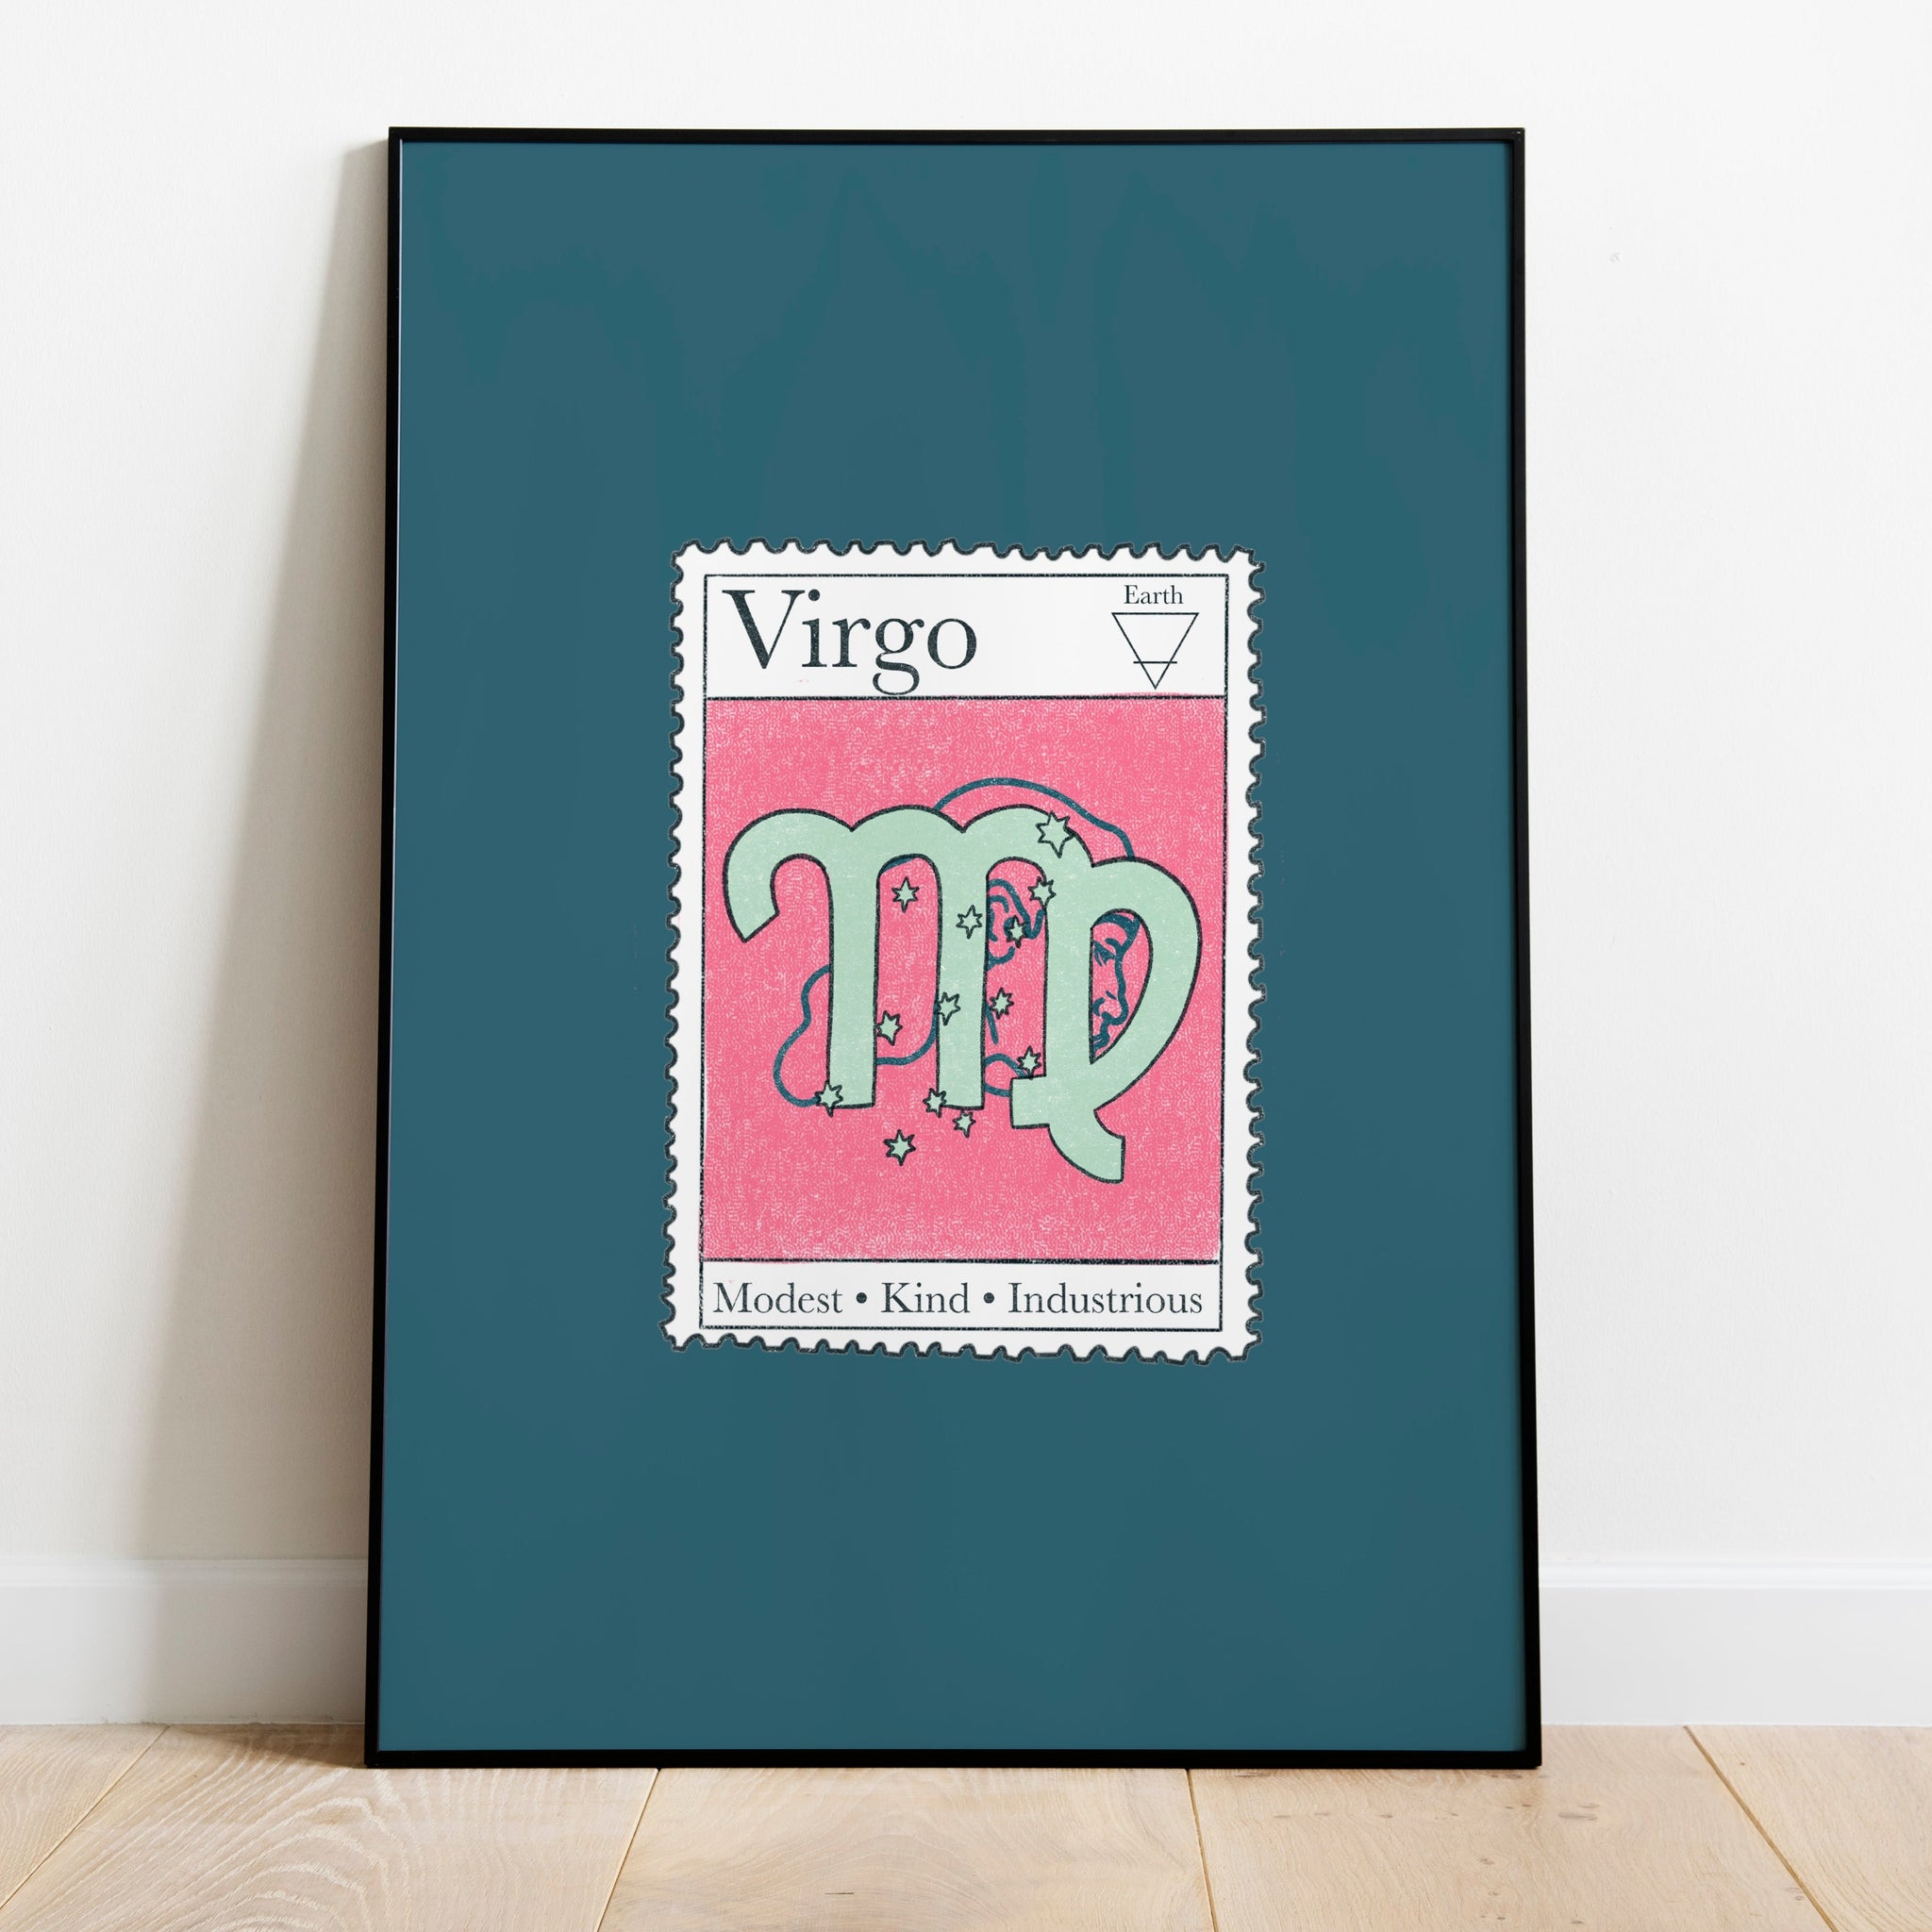 Image of a framed art print leaning against the wall. The art print itself is a postage stamp representing the star sign of virgo. The print is bright and colourful in shades of teal, blue and pink.